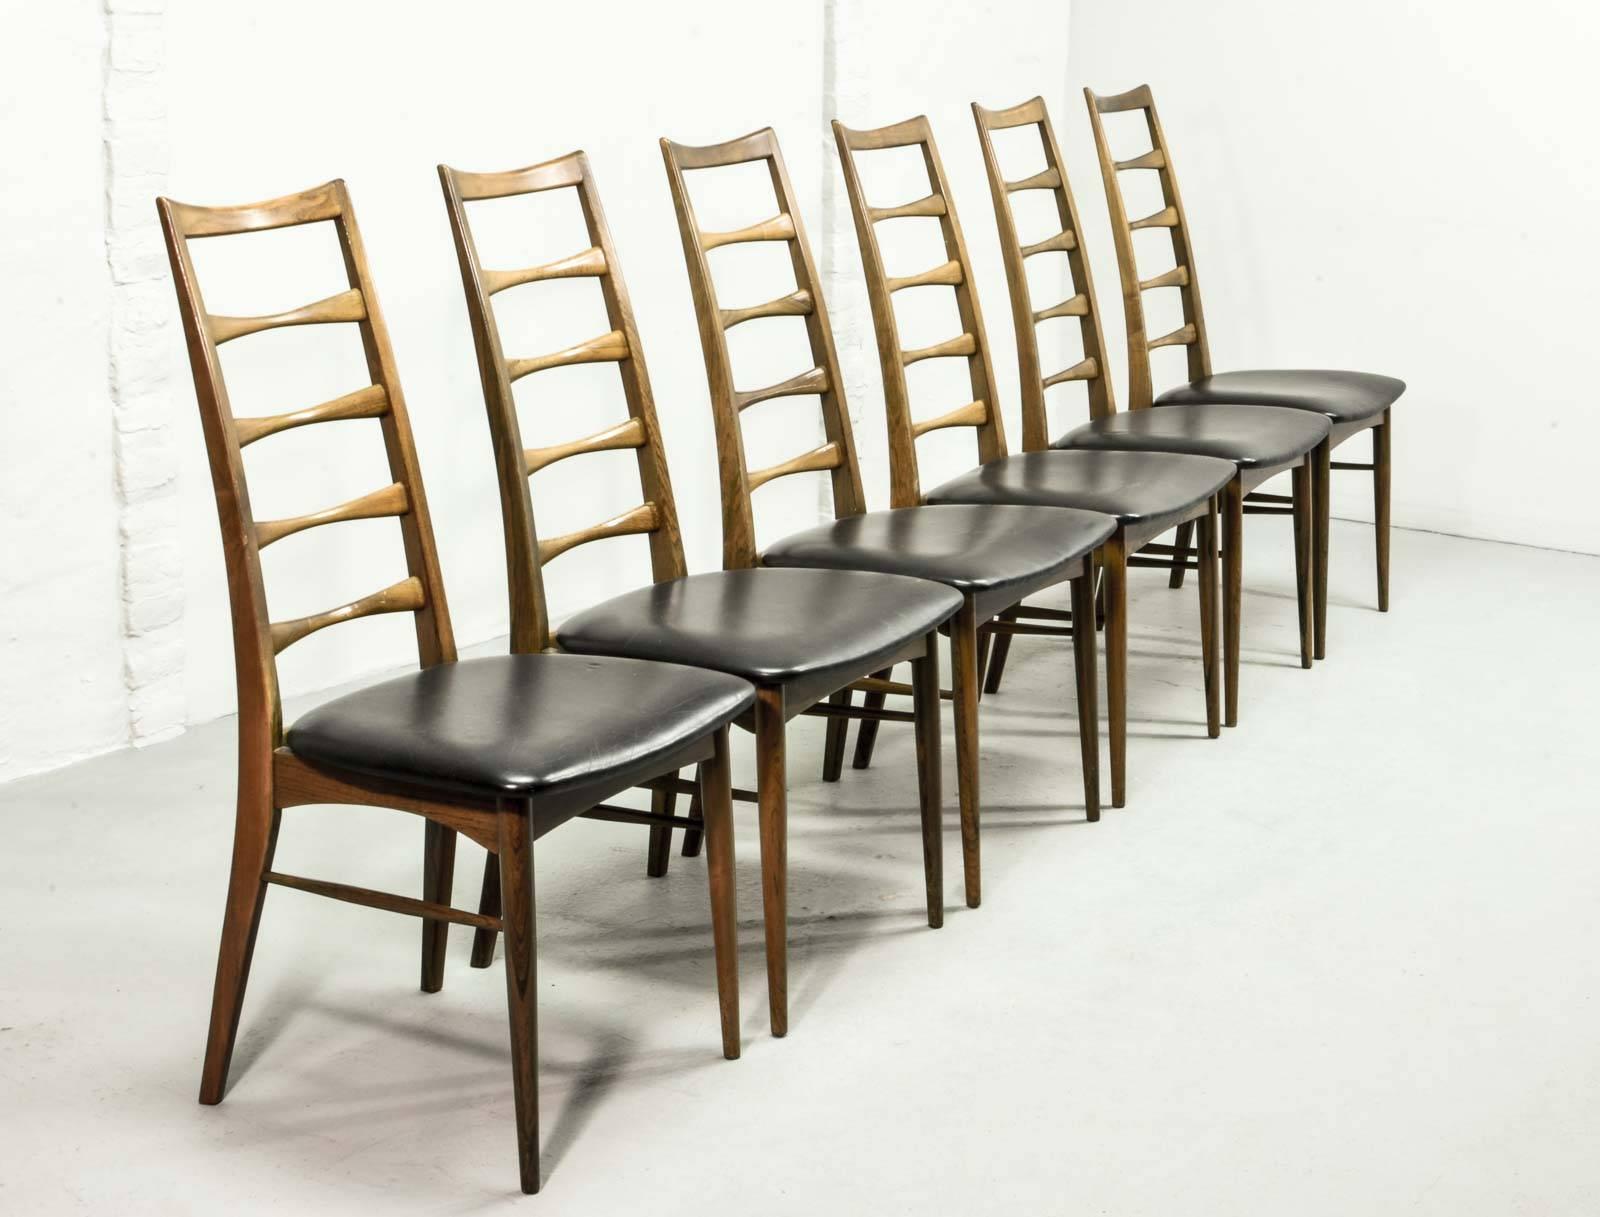 Sublime rosewood set of six high back dining chairs designed by Niels Koefoed for Koefoed Hornslet, Denmark. This stylish and elegant model ‘Lis’ with uniquely tapered ladder back and legs has its seat pad upholstered in a perfect conserved black